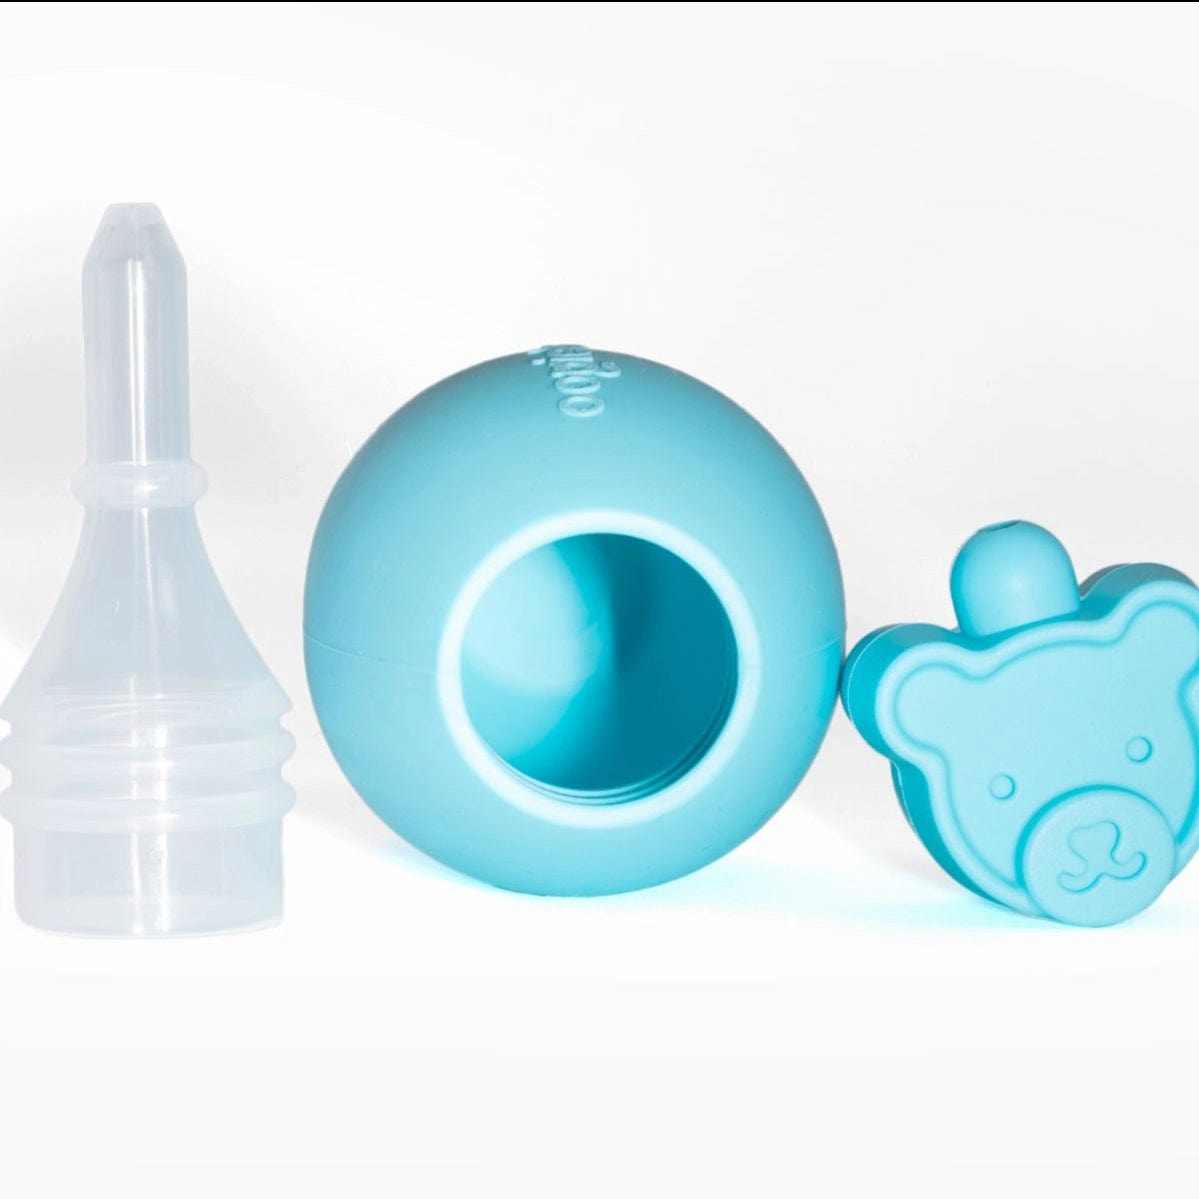 Oogiebear Bulb Aspirator Handheld Baby Nose Cleaner For Newborns, Infants,  And Toddlers : Target